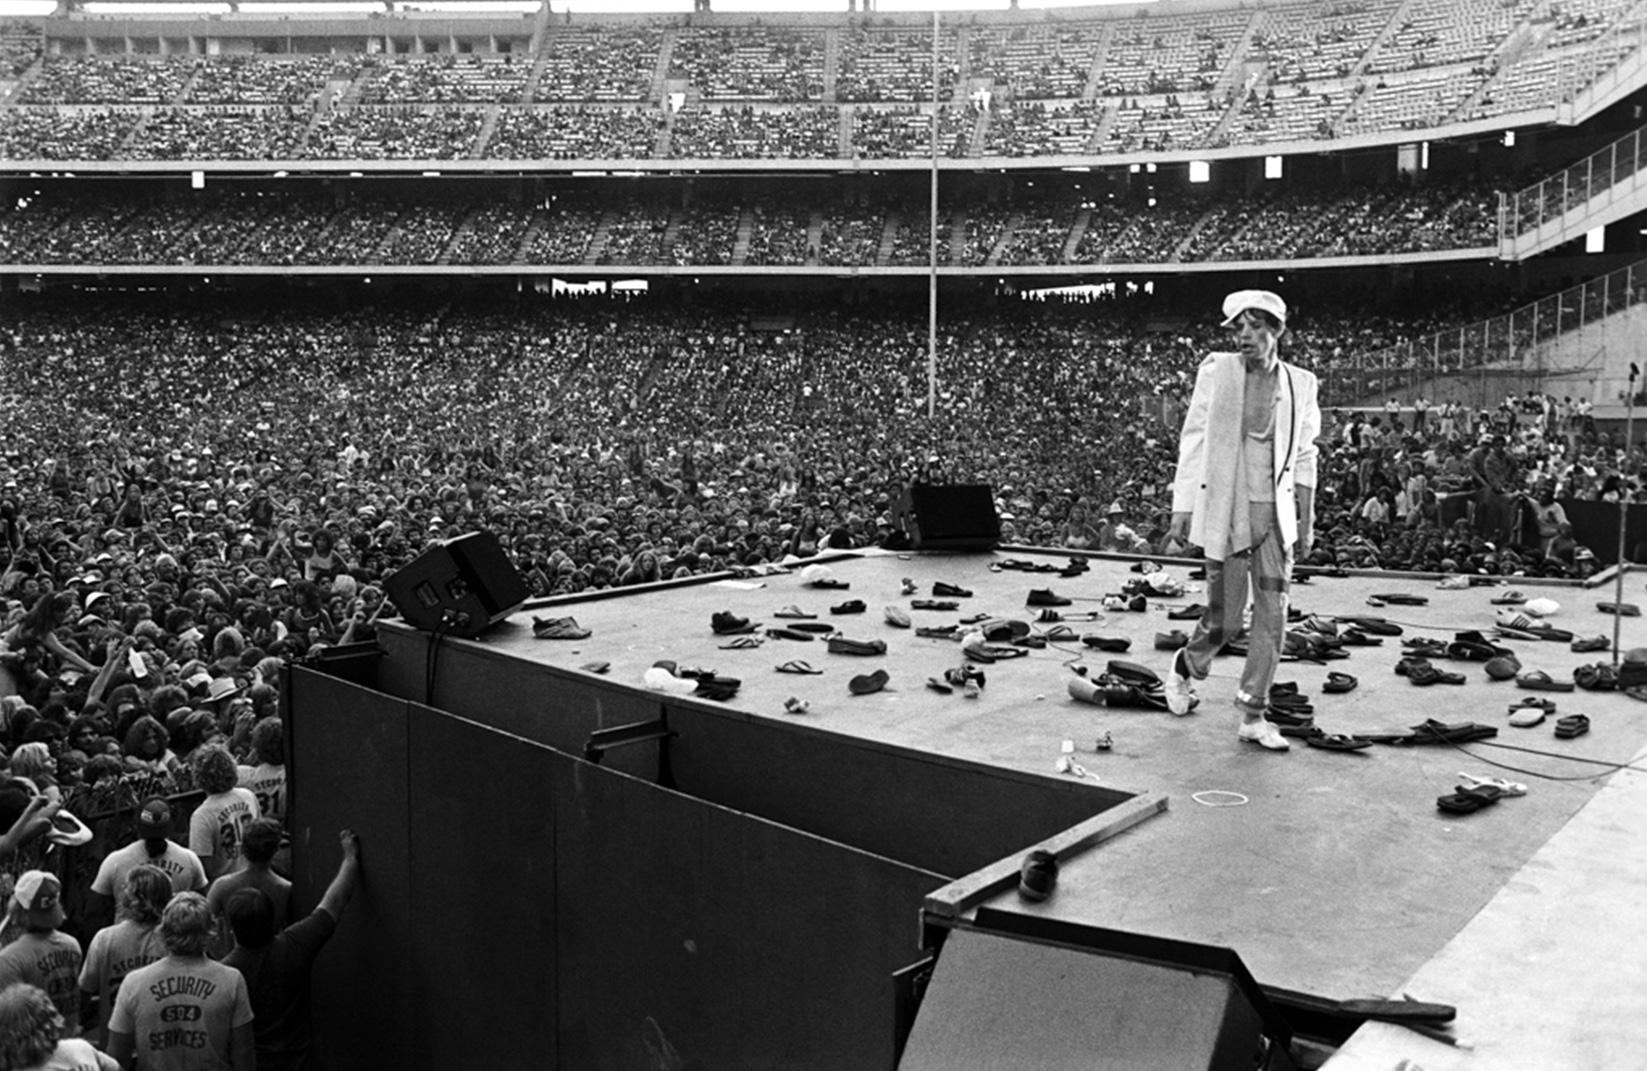 20”x24” signed limited edition print of Mick Jagger of The Rolling Sones surrounded by boots that had been thrown on the stage by fans in 1978 by Lynn Goldsmith, signed and numbered #10/20.